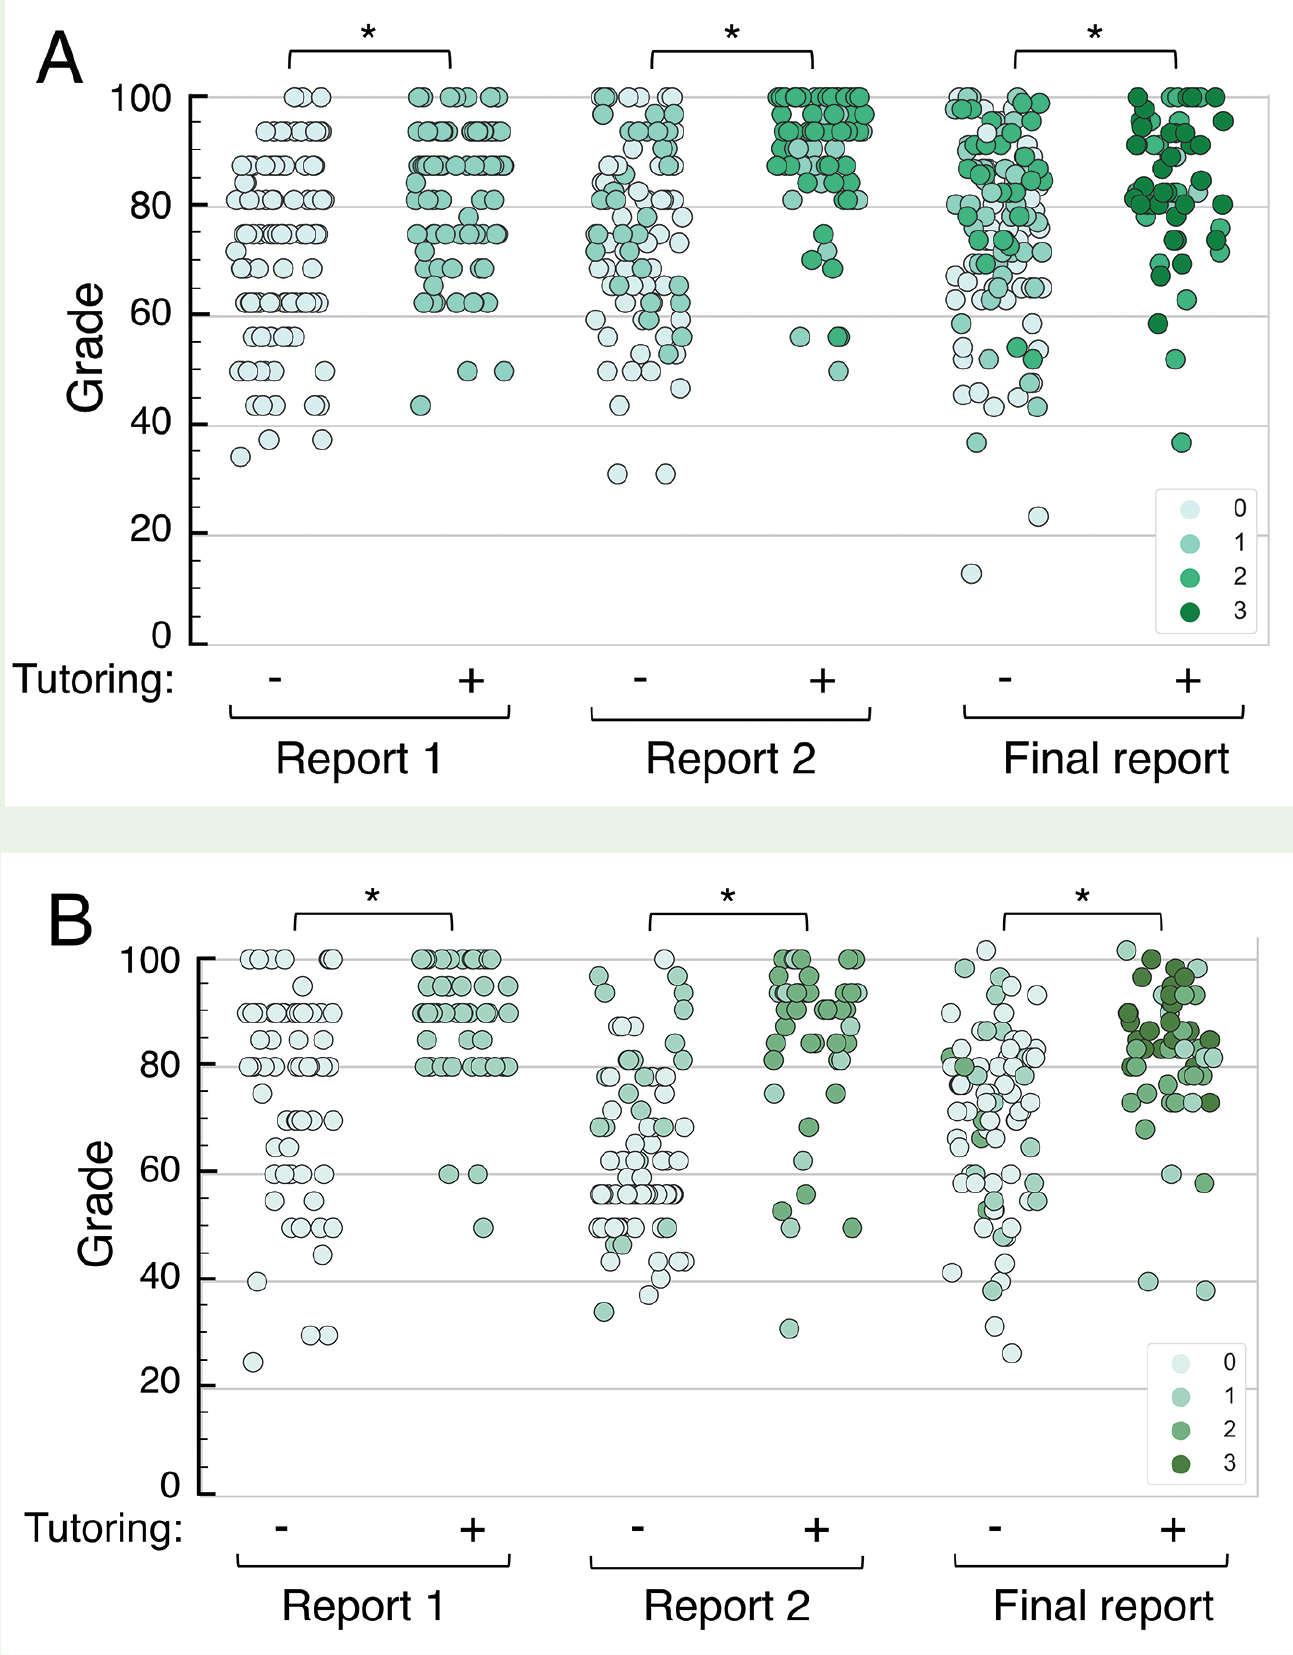 The distribution of grades for 2013 (A) and 2014 (B) on three lab reports: a Materials and Methods section (Report 1), a Results section with figure and caption (Report 2), and a combined final report. Grades for each report were clustered into strips by tutoring (+) or no tutoring (–) on that lab report. A green hue value of between 0 and 3 illustrates the cumulative number of lab reports tutored. Asterisk denotes a significant difference between the tutored and nontutored groups, p < .01, t-test with Bonf